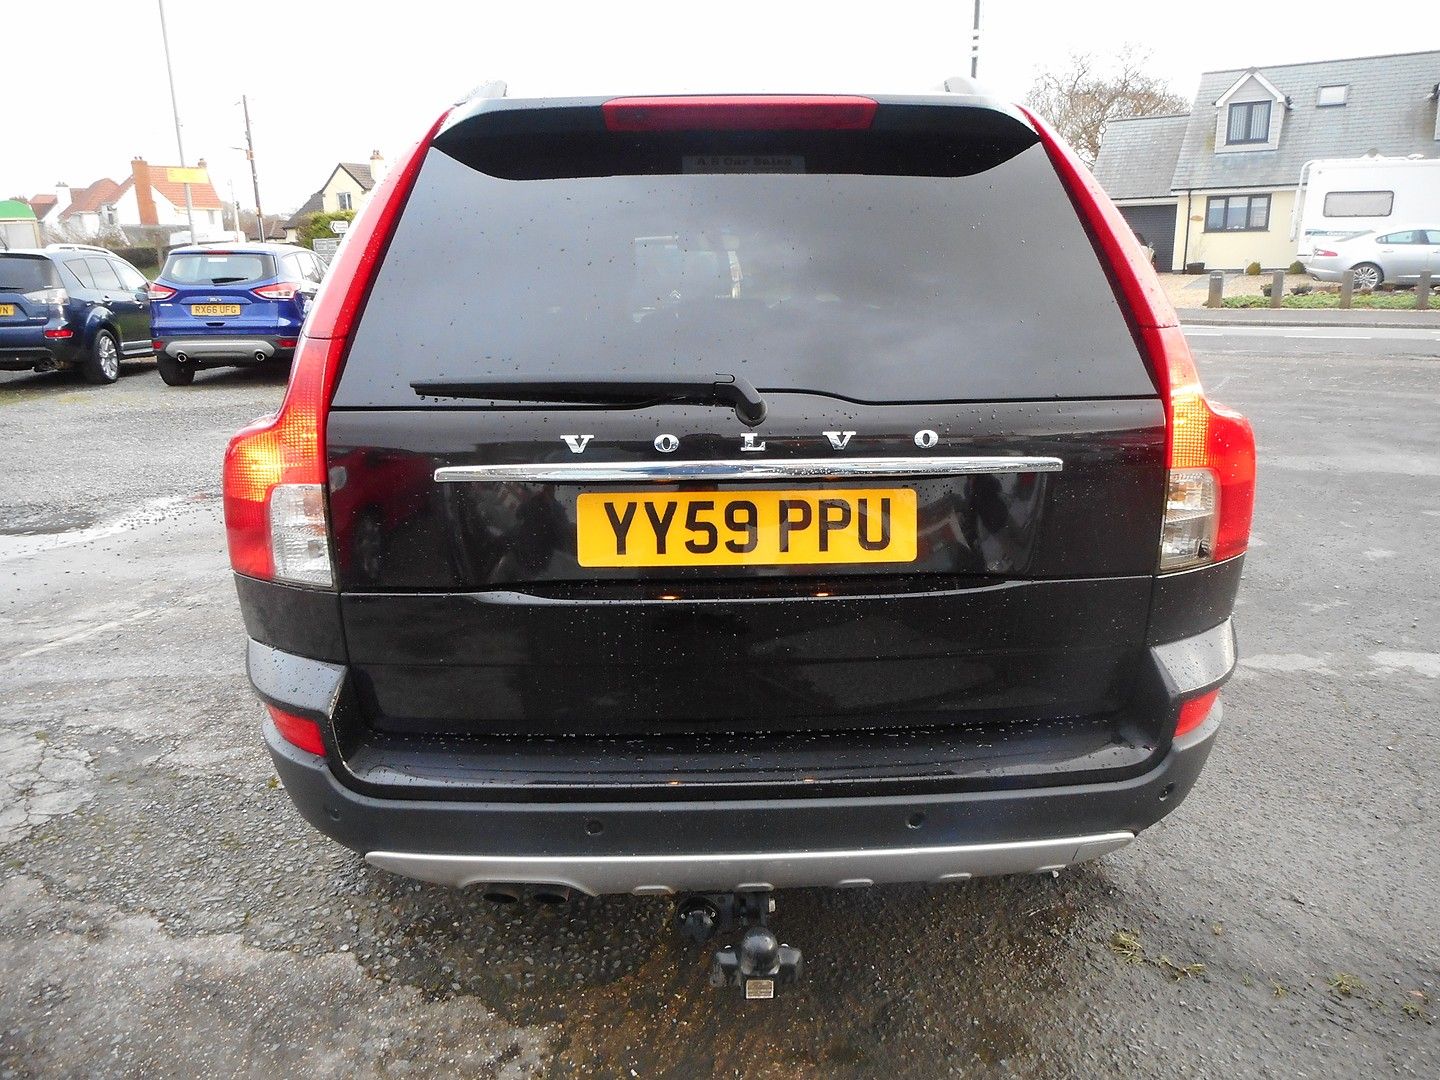 VOLVO XC90 D5 AWD (185 bhp) Executive Geartronic (2009) - Picture 17